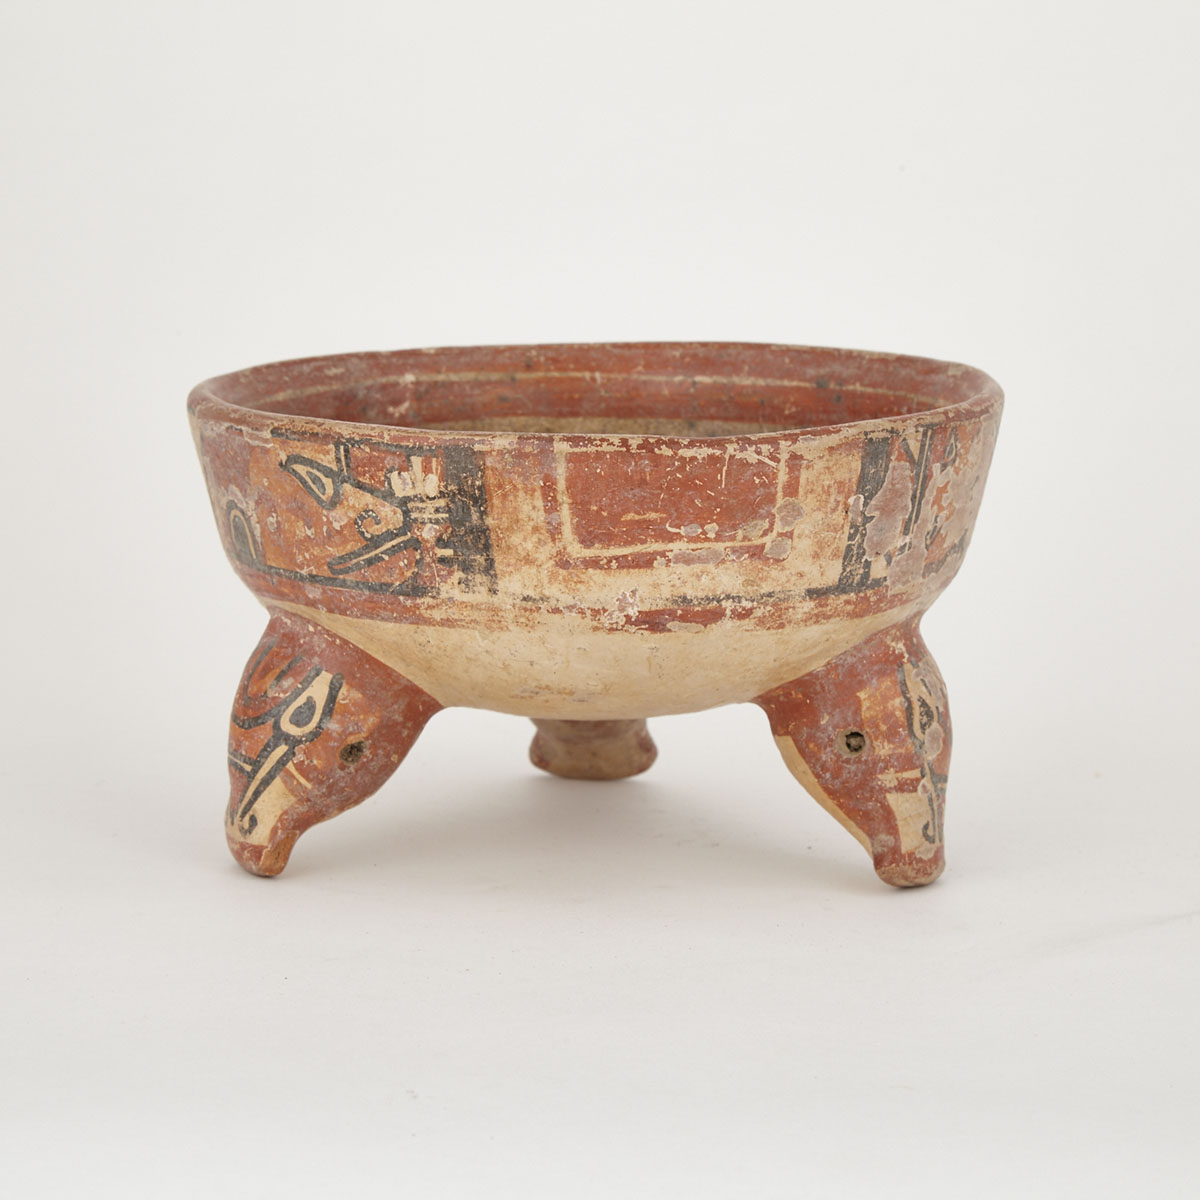 Guanacaste Polychromed Pottery Rattling Tripod Bowl, Late Classic Period, 800-1200 A.D.